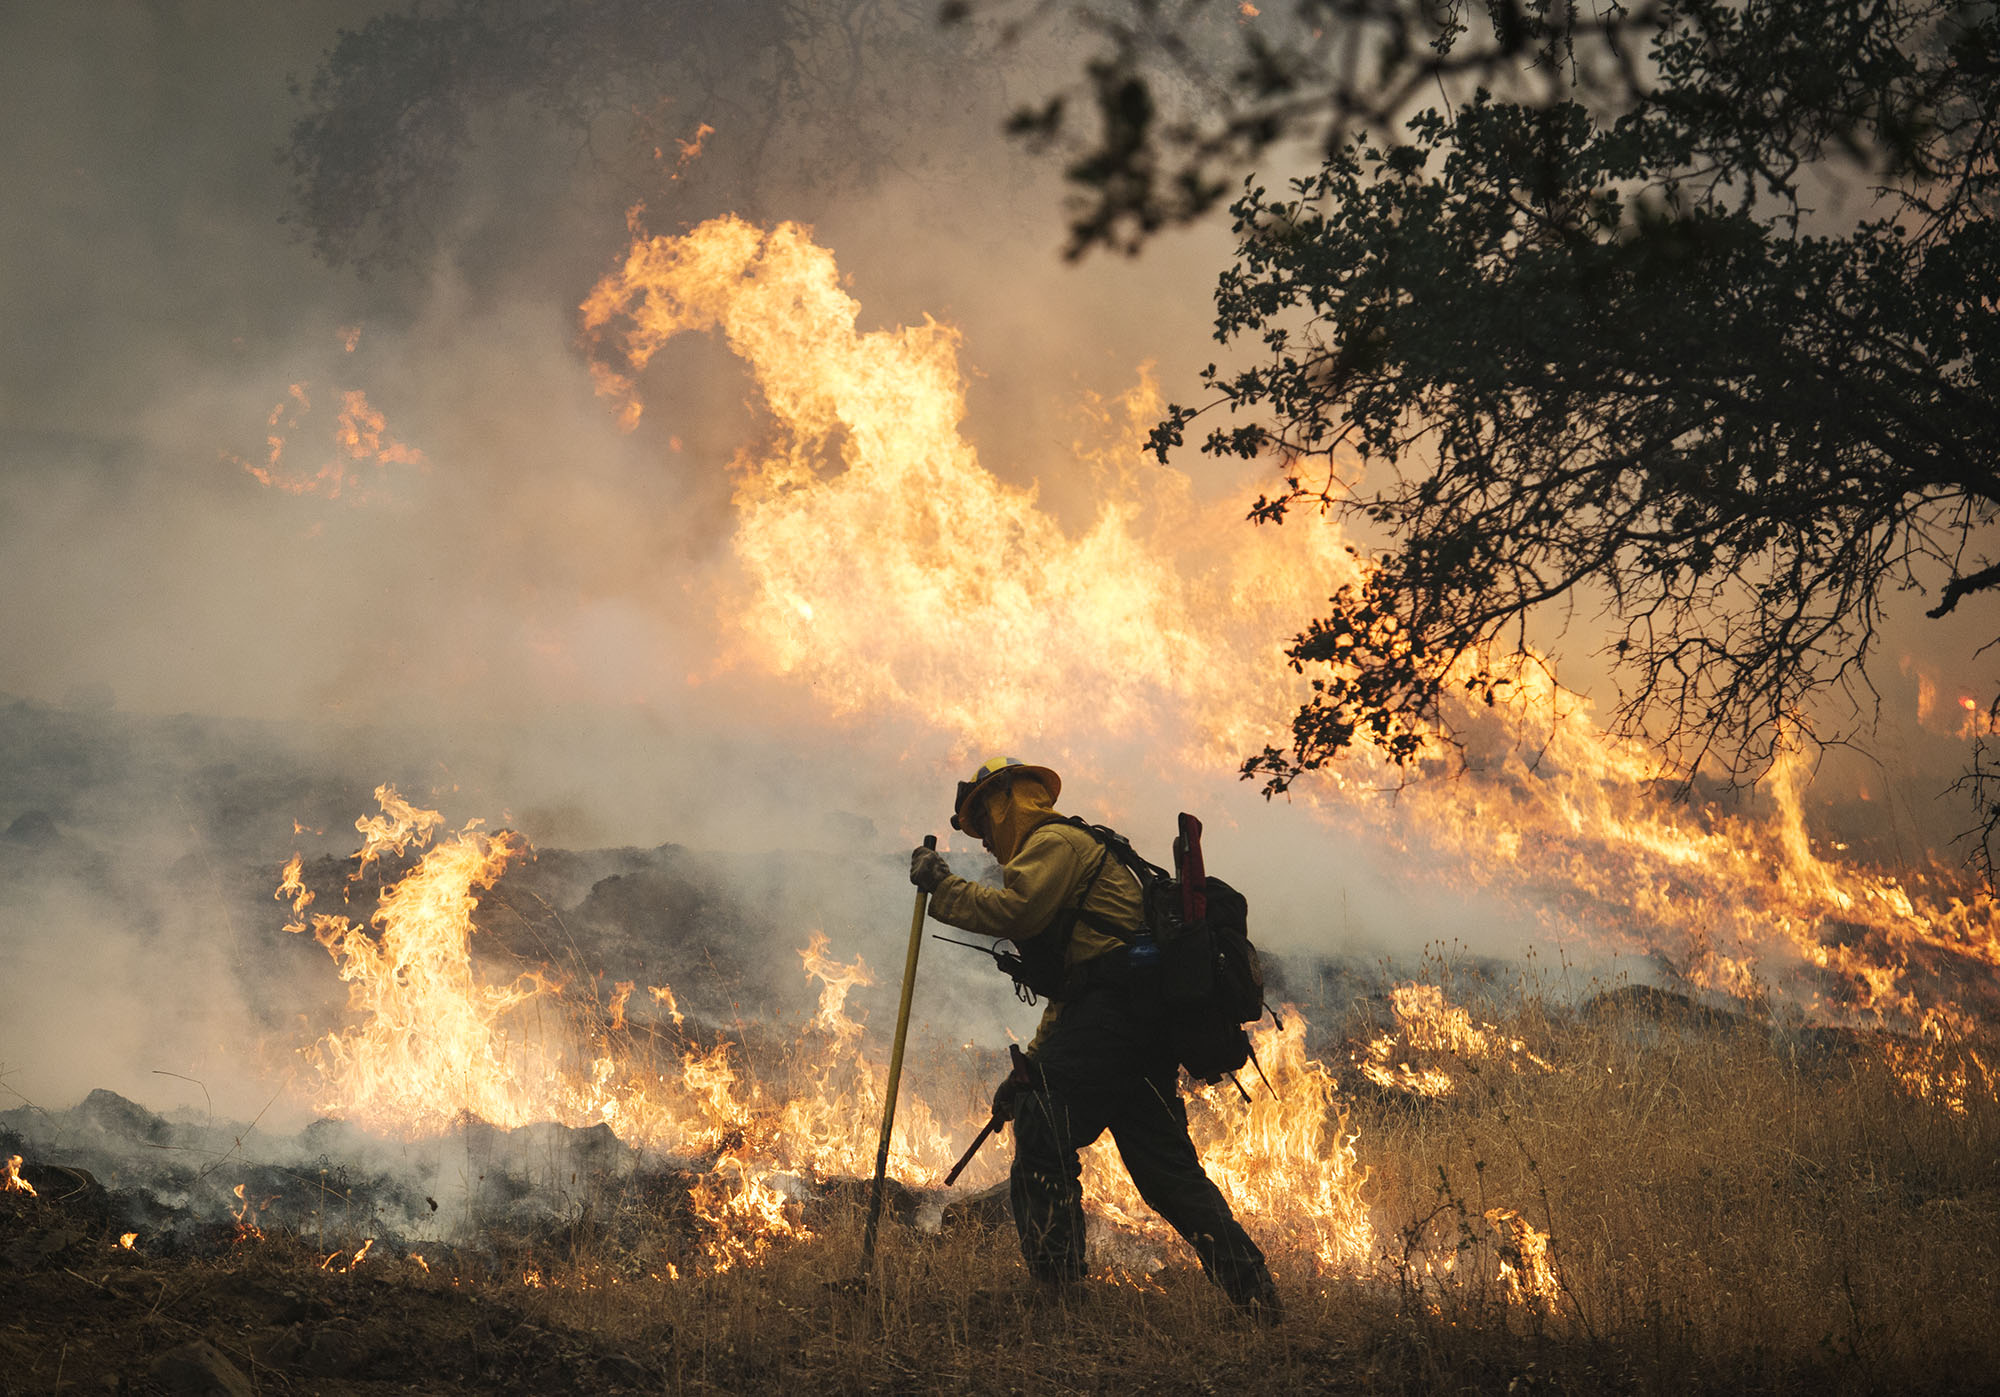 A firefighter lights a back burn along Highway 29 north of Middletown in Lake County, Calif. (Photo: Randy Pench/Newscom)